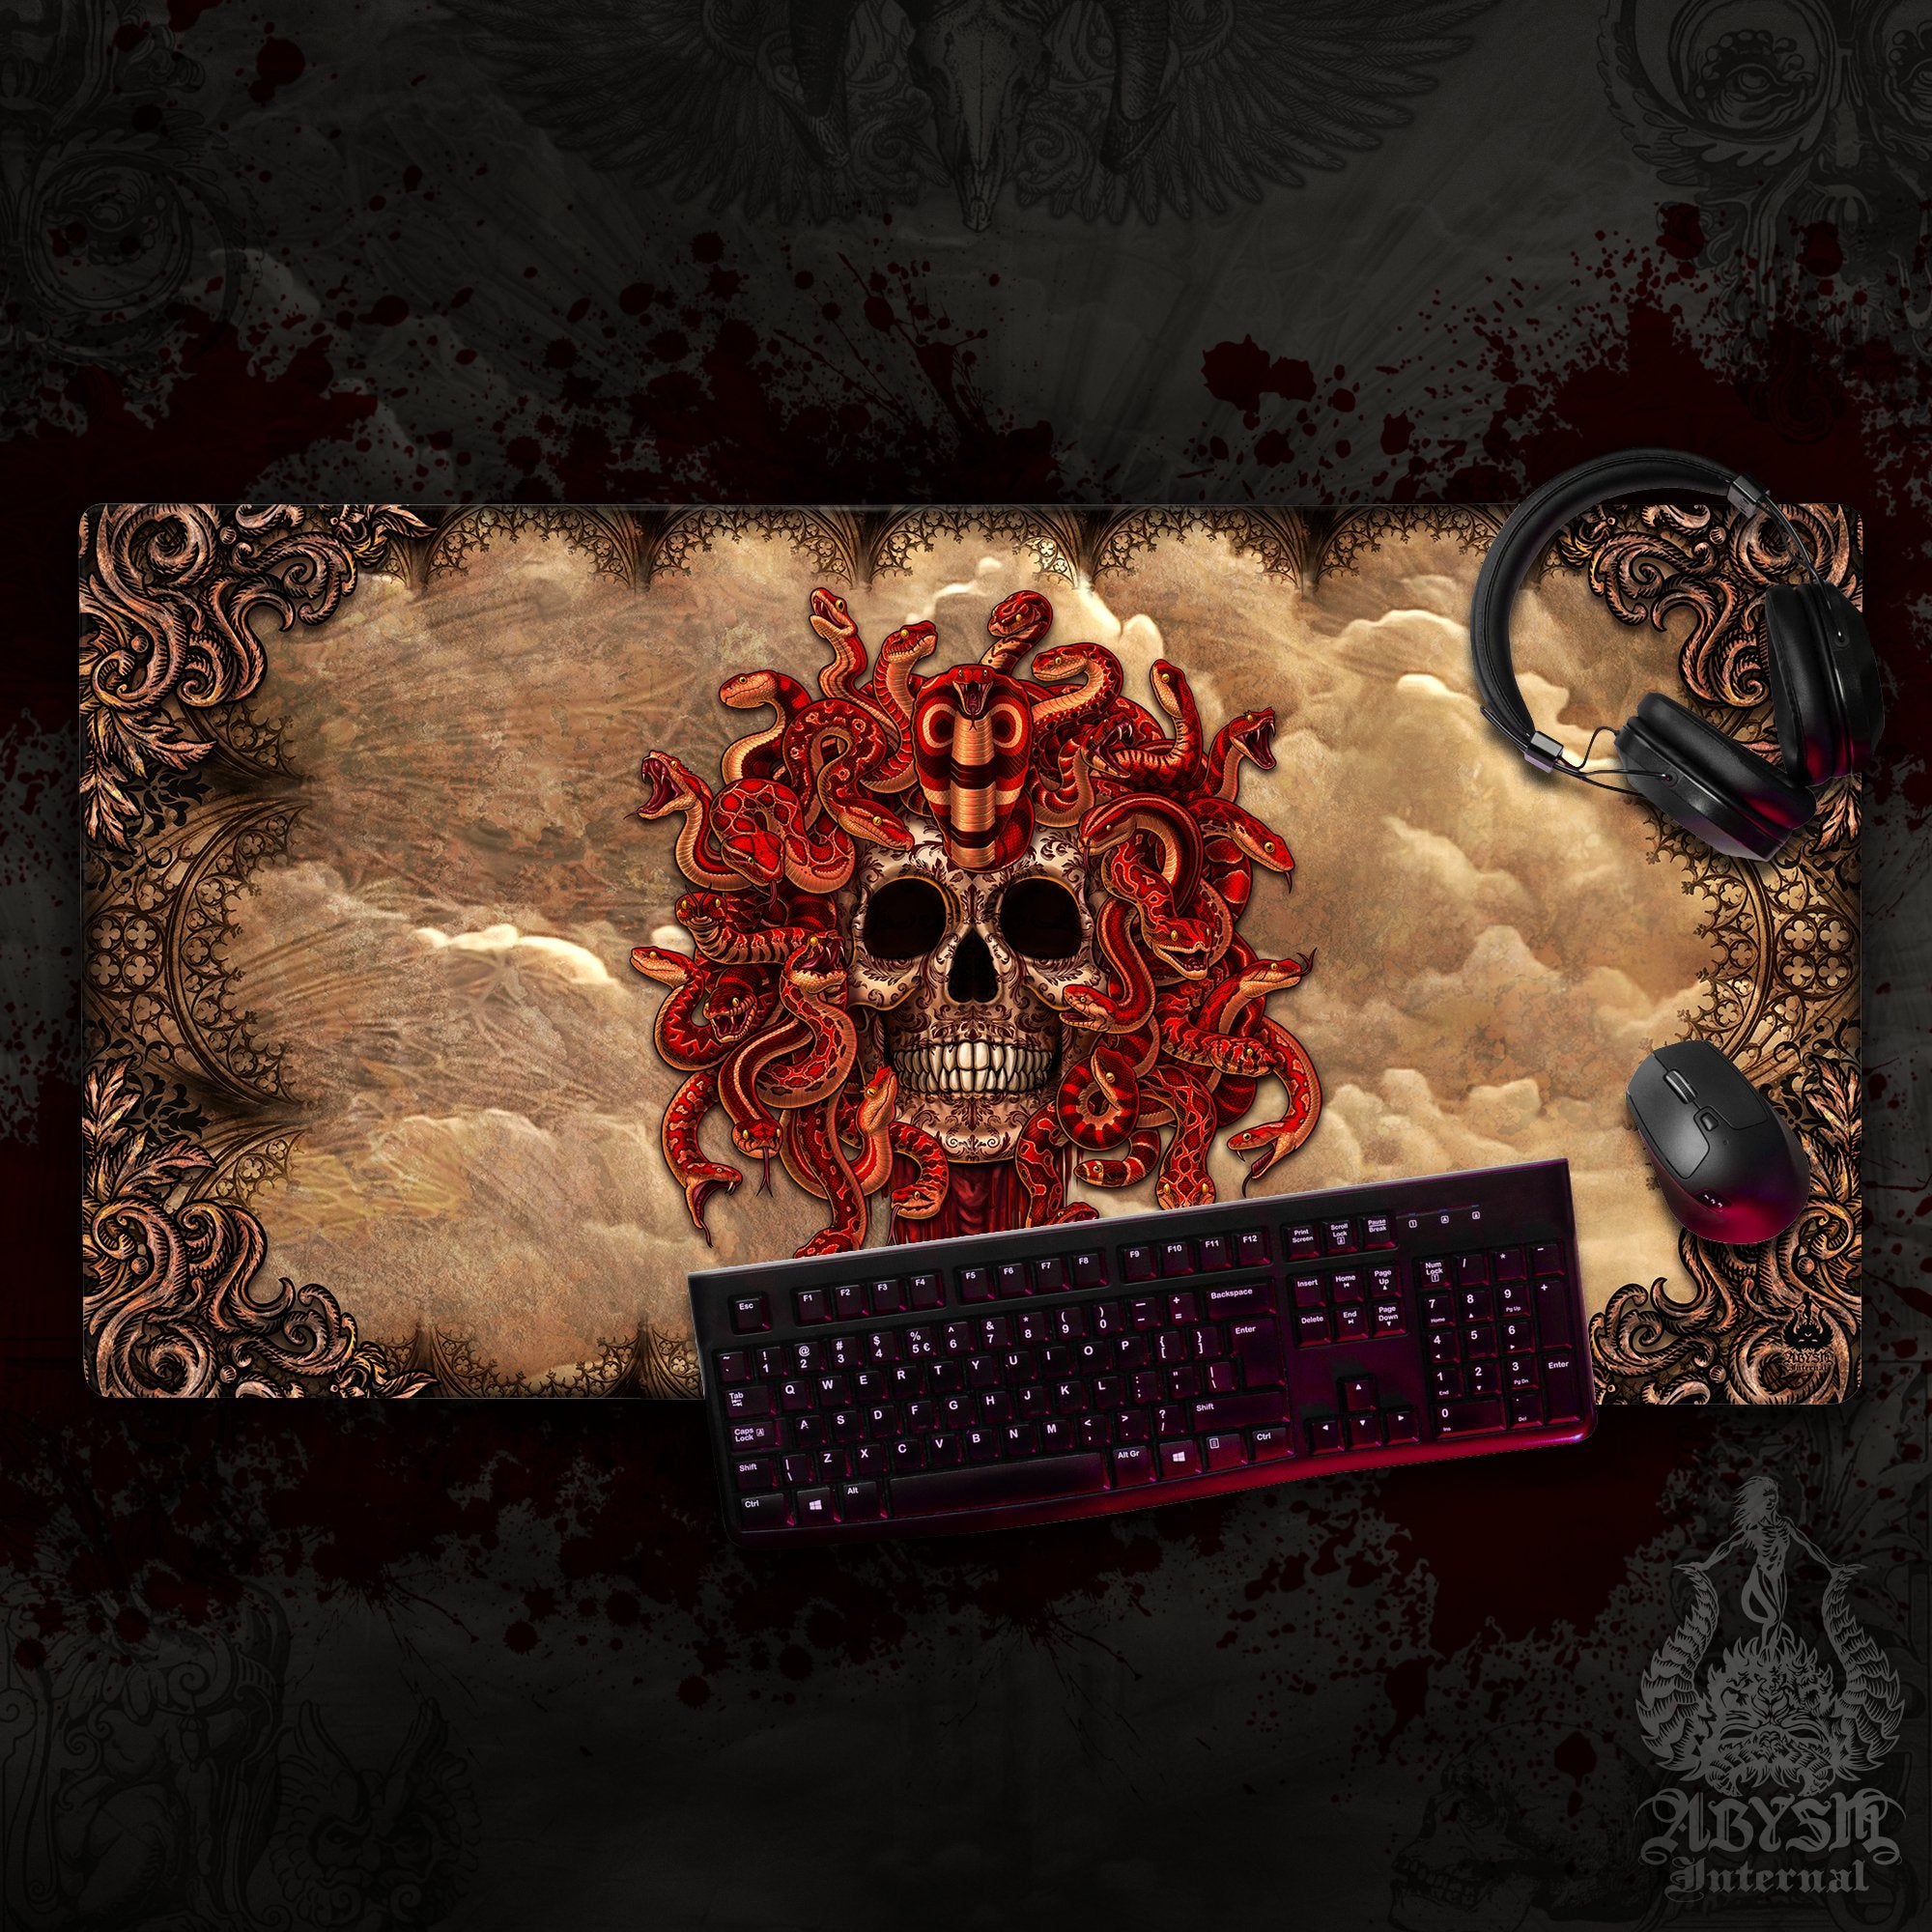 Skull Mouse Pad, Gothic Horror Gaming Desk Mat, Goth Workpad, Medusa Table Protector Cover, Dark Fantasy Art Print - Beige, 4 Face Options - Abysm Internal